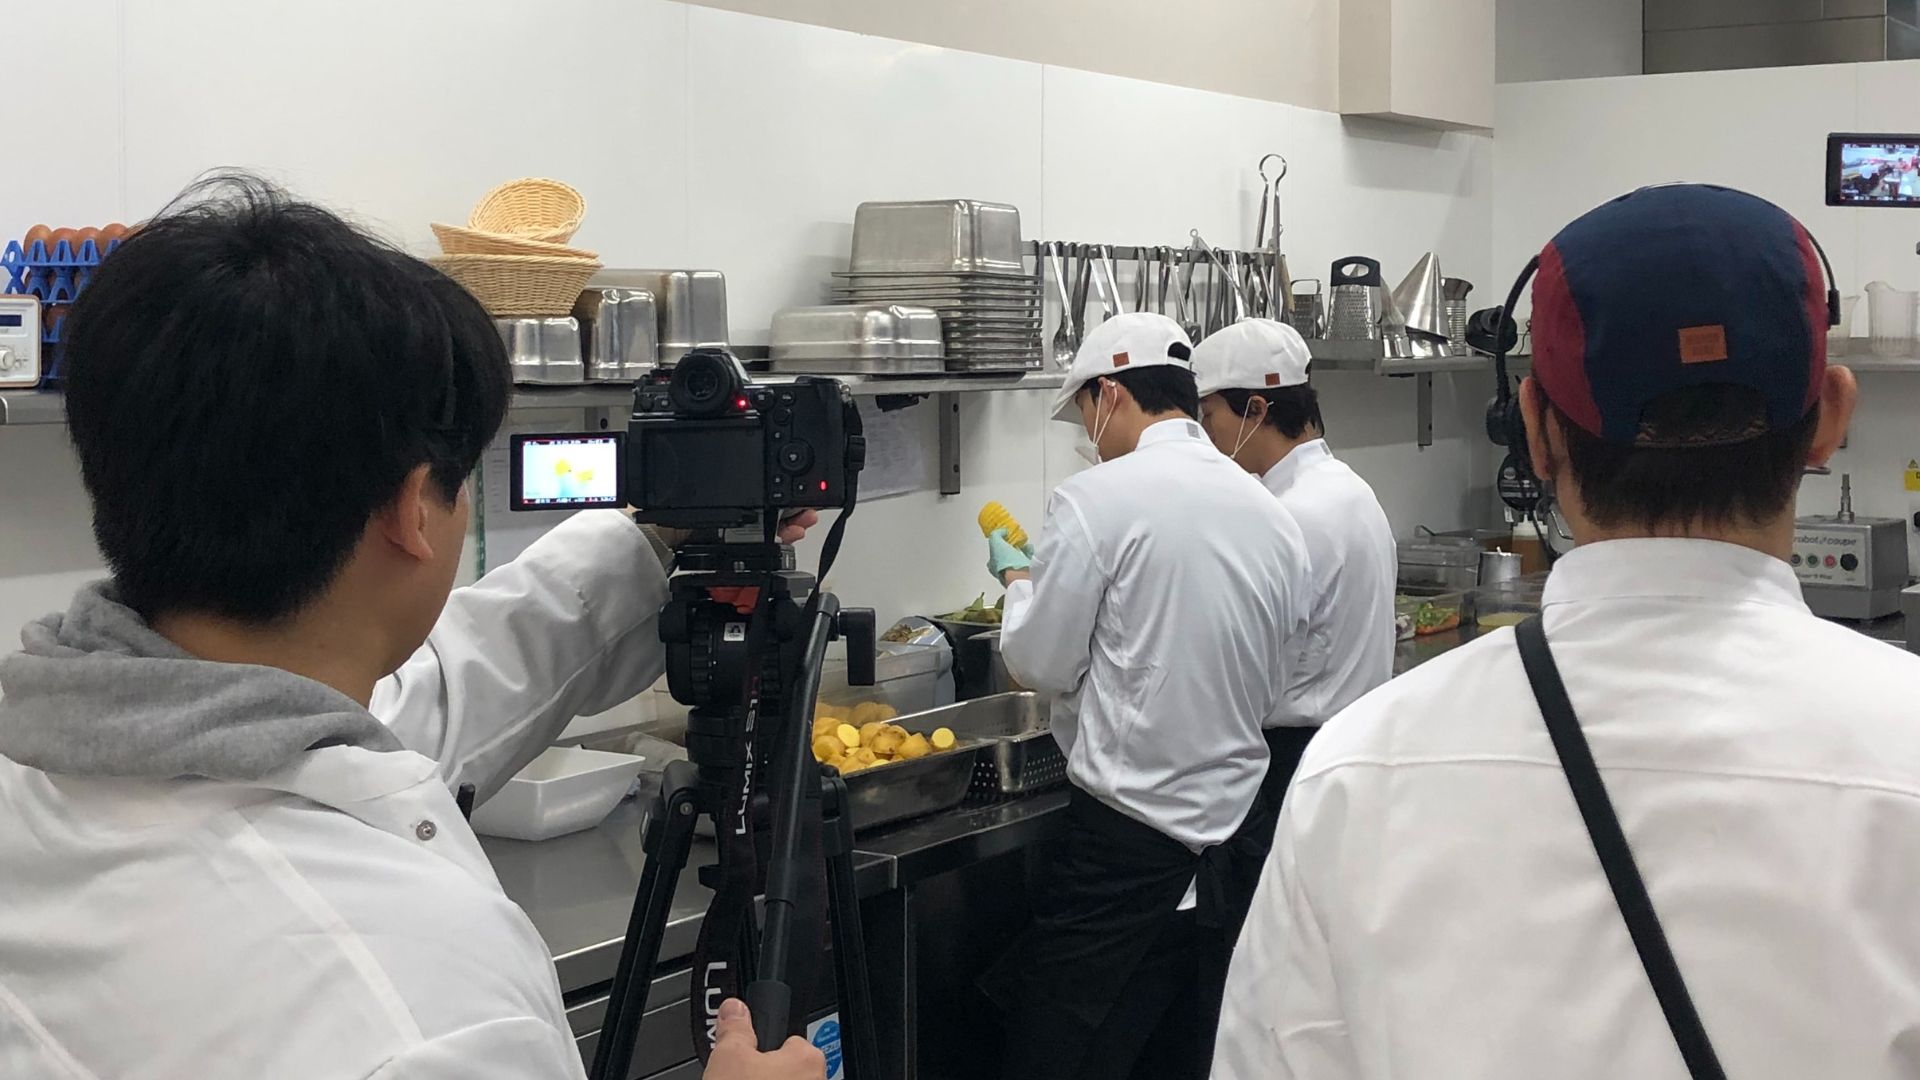 A film crew dressed in chefs whites shooting a TV show in a commercial kitchen